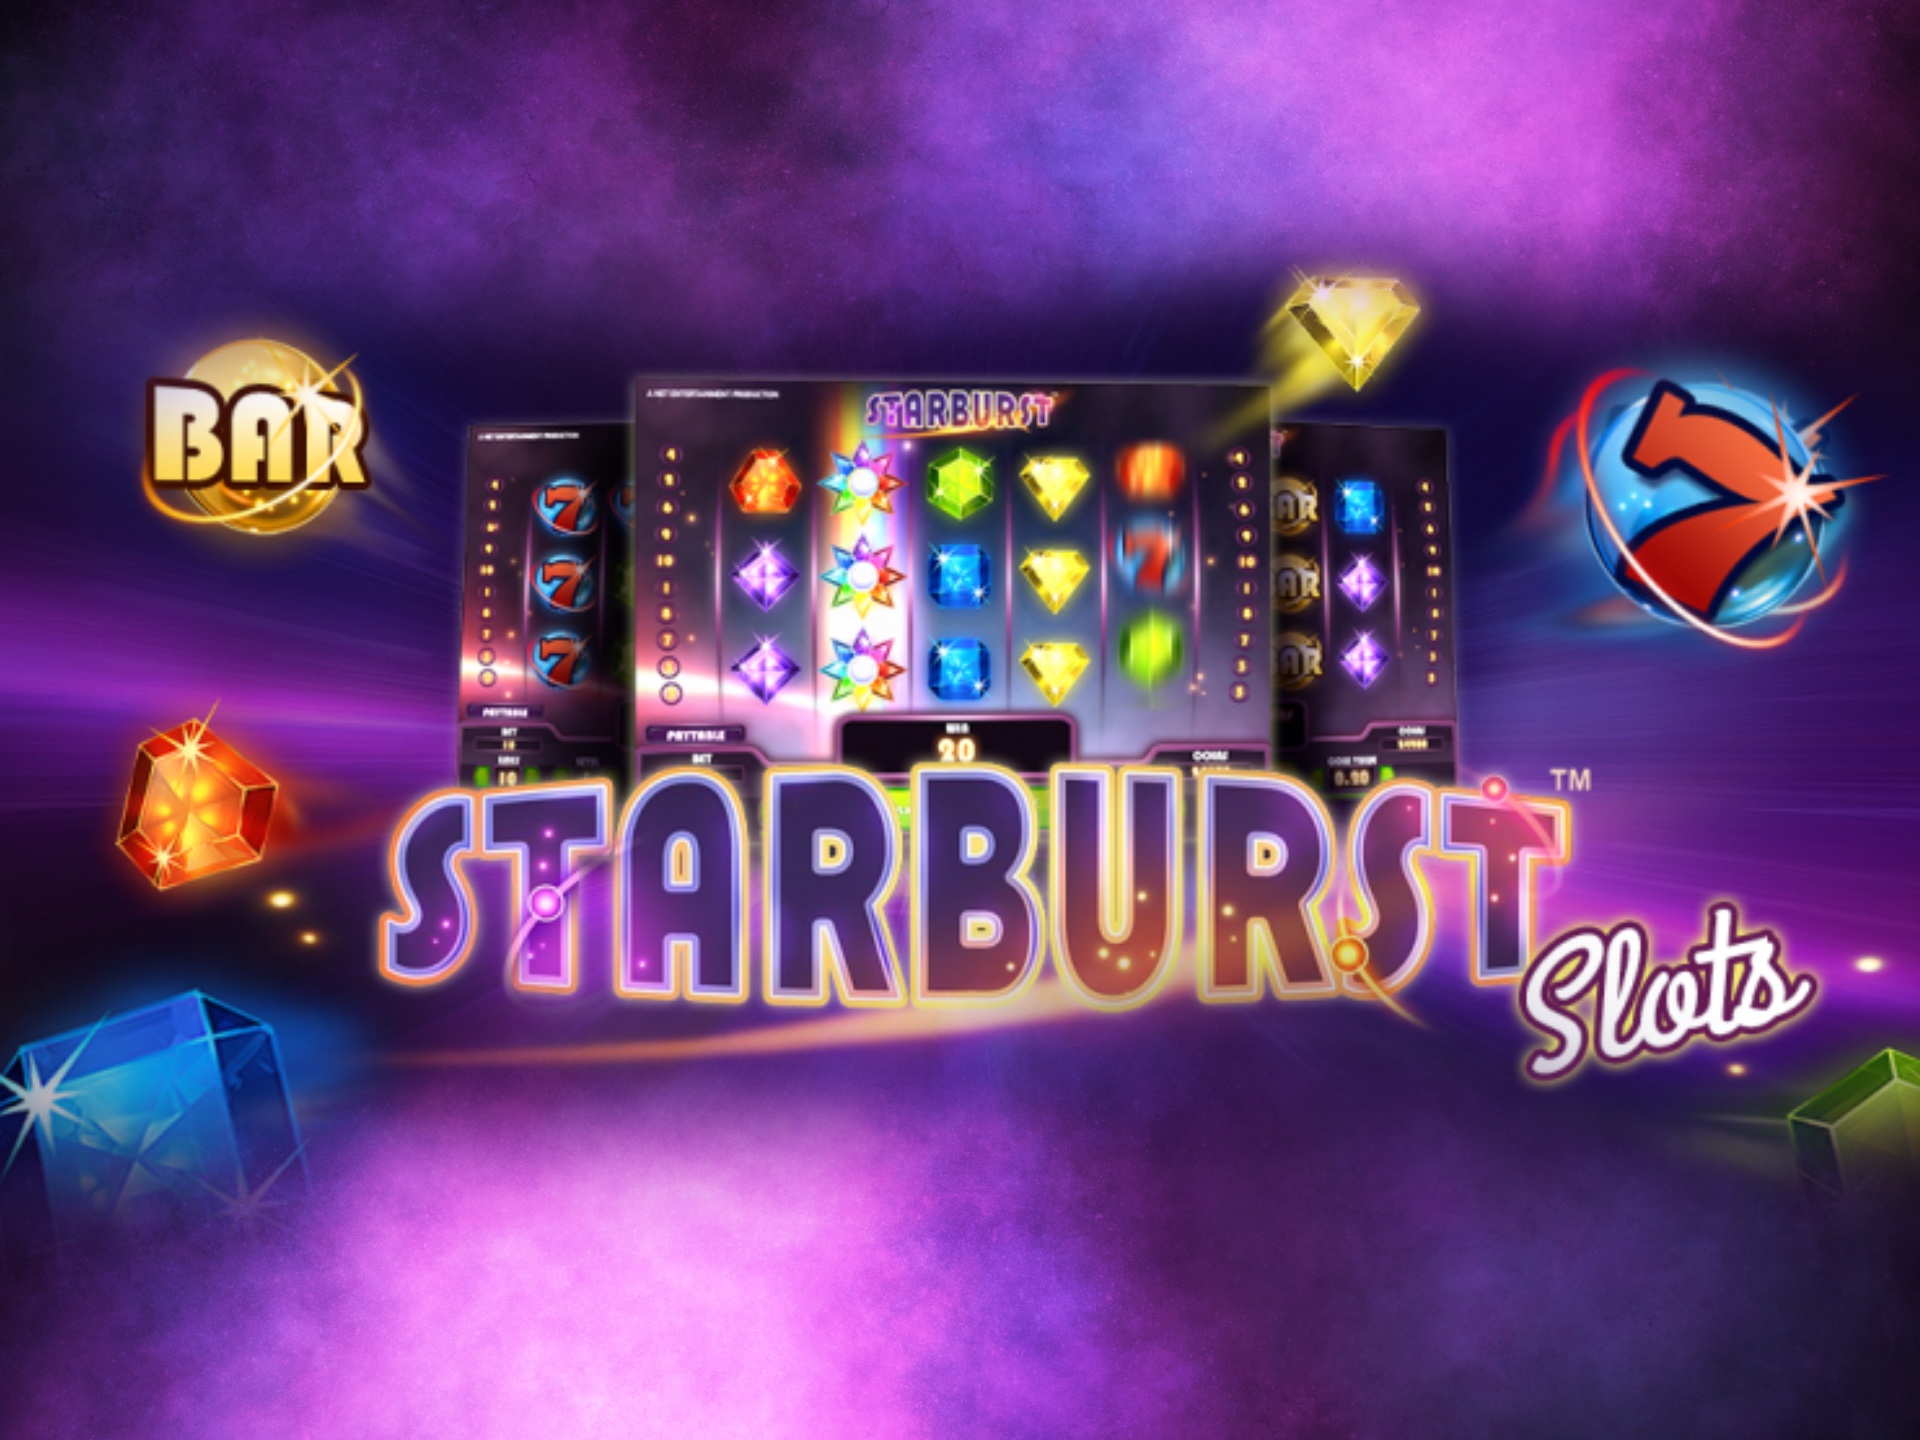 This slot has a great payout and is very profitable to play.